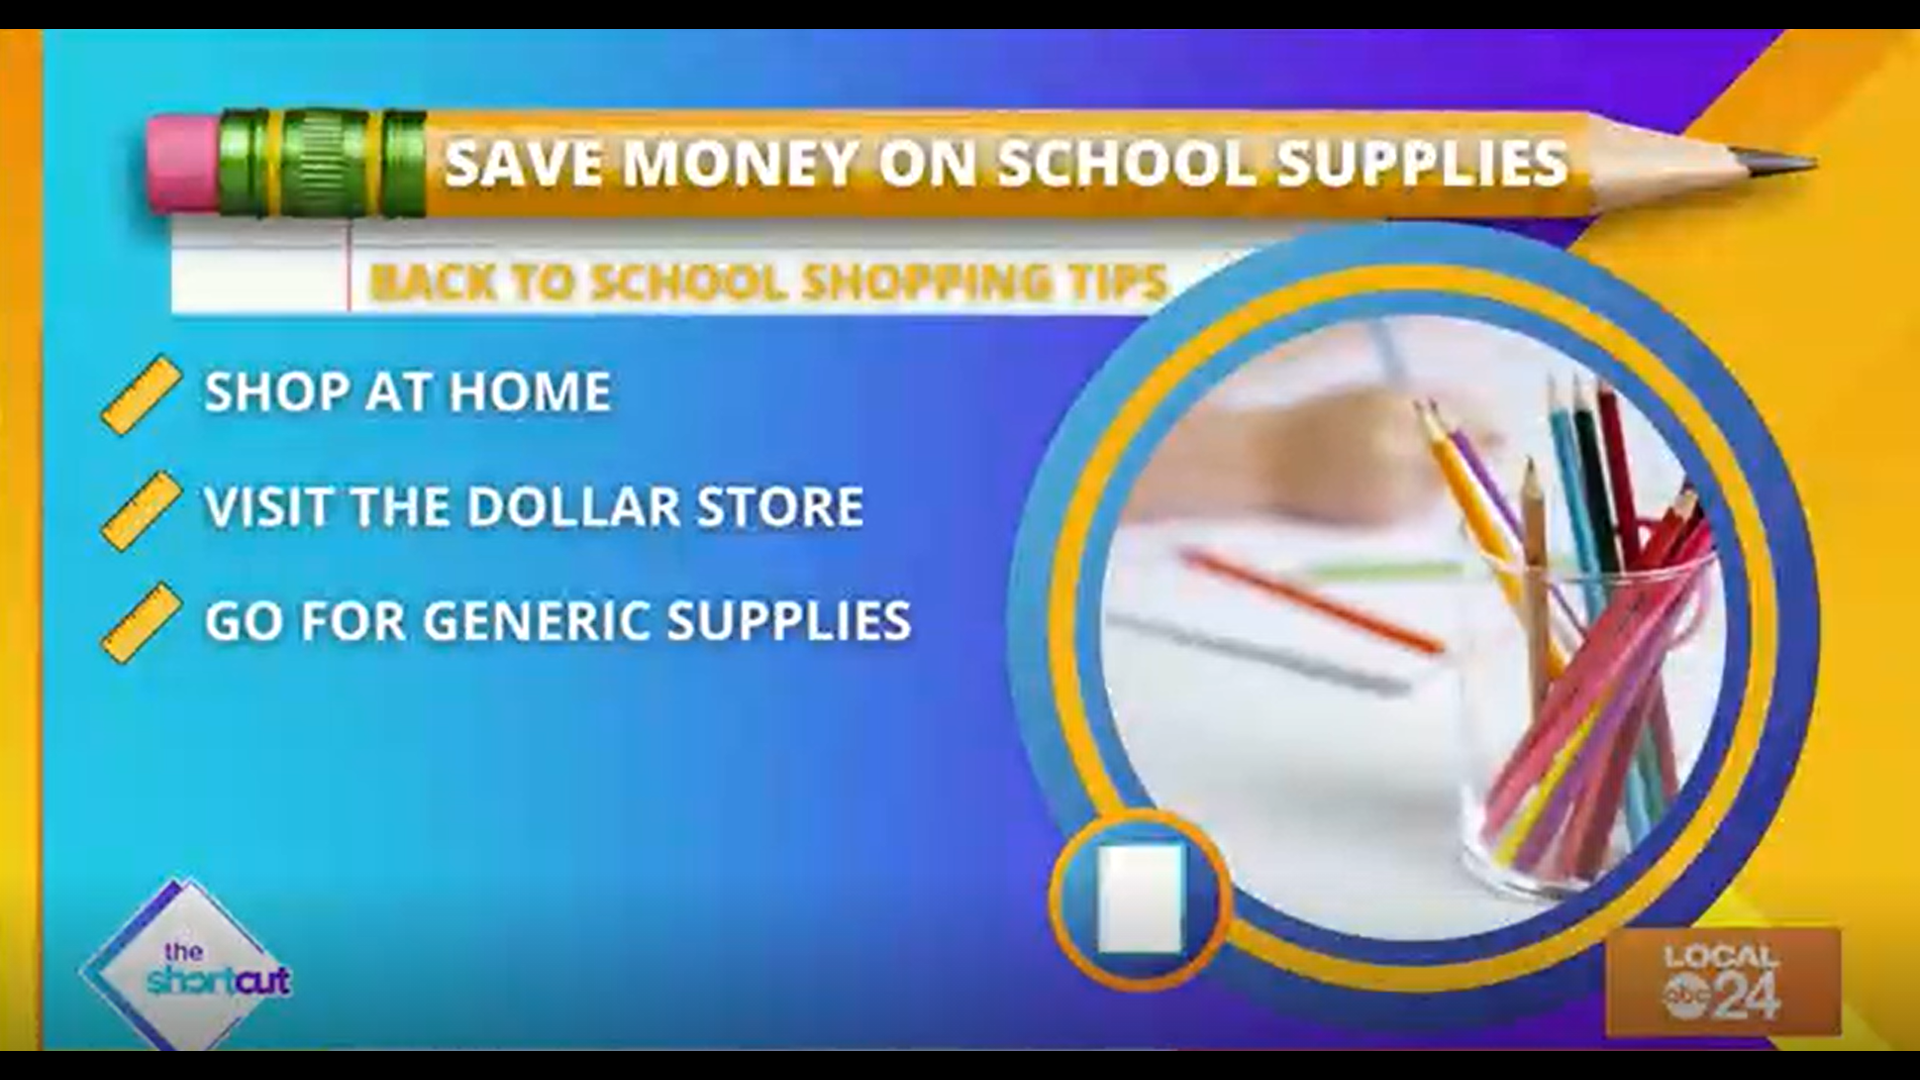 Looking to save money on school supplies this year? Use these saving tips to help you do so from sticking to your list to shopping for generic items!